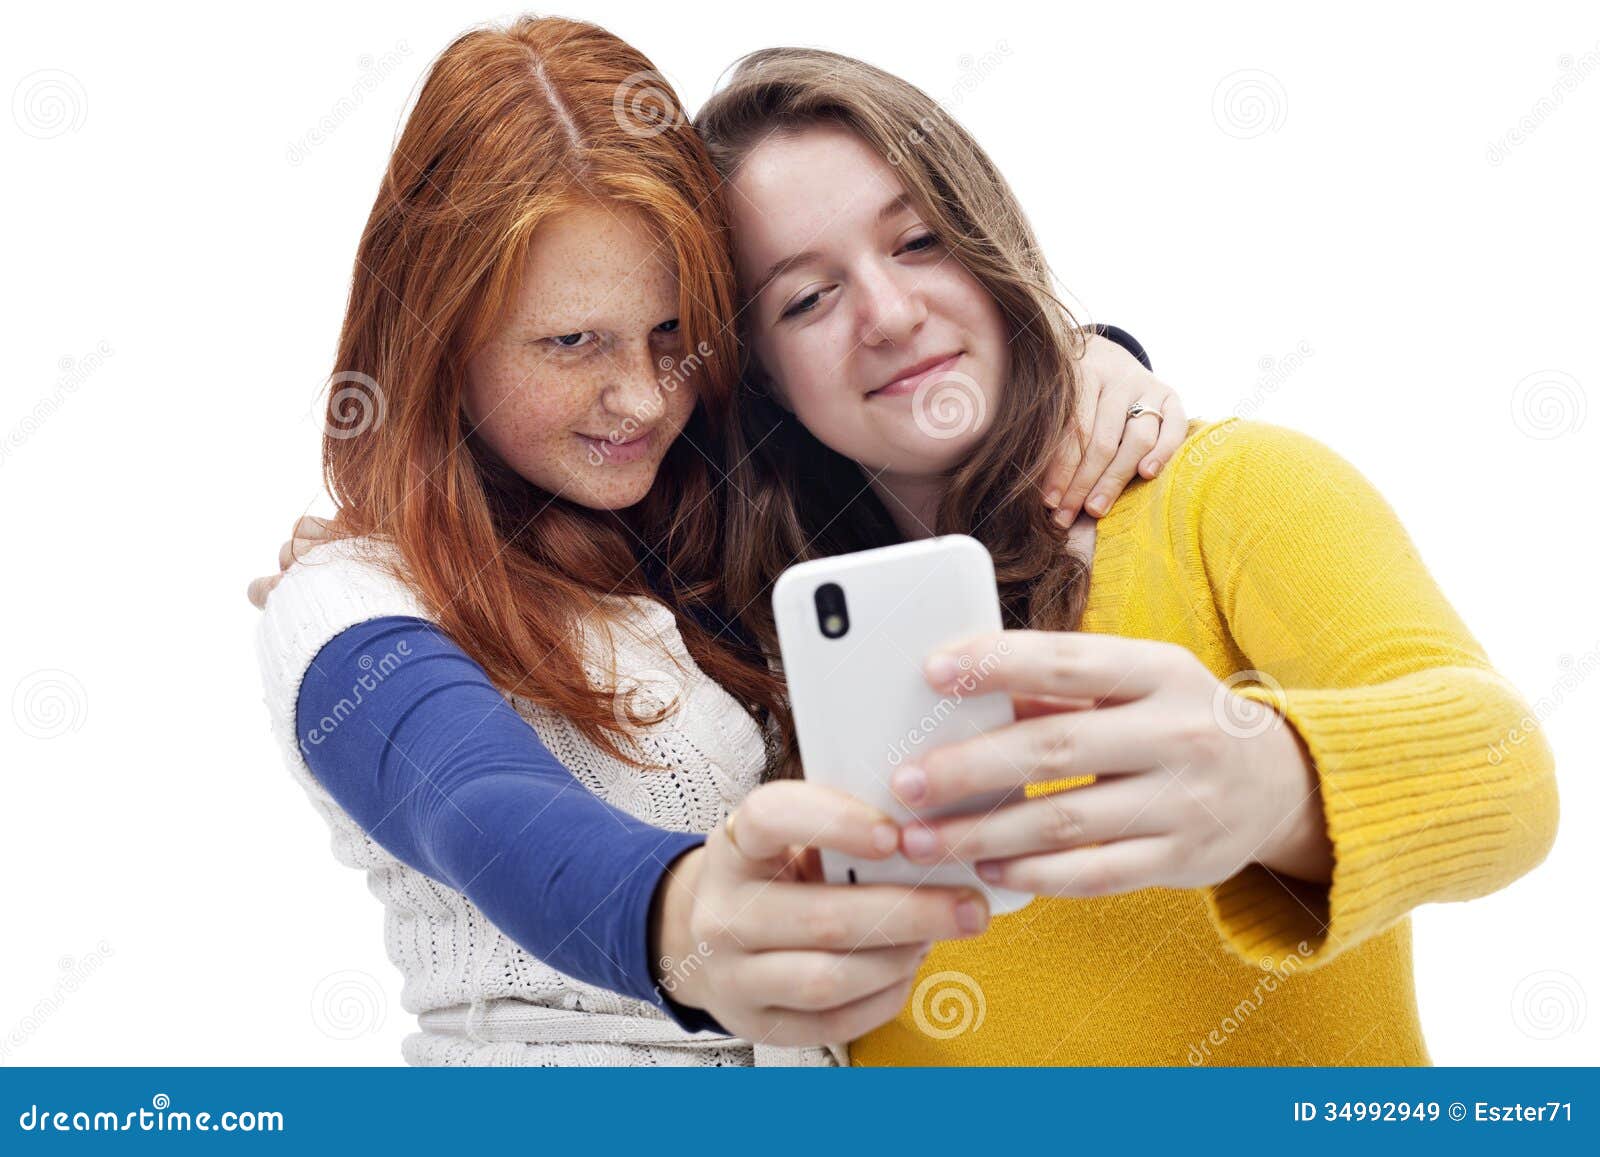 Teen girls with phone stock image. Image of caucasian - 34992949